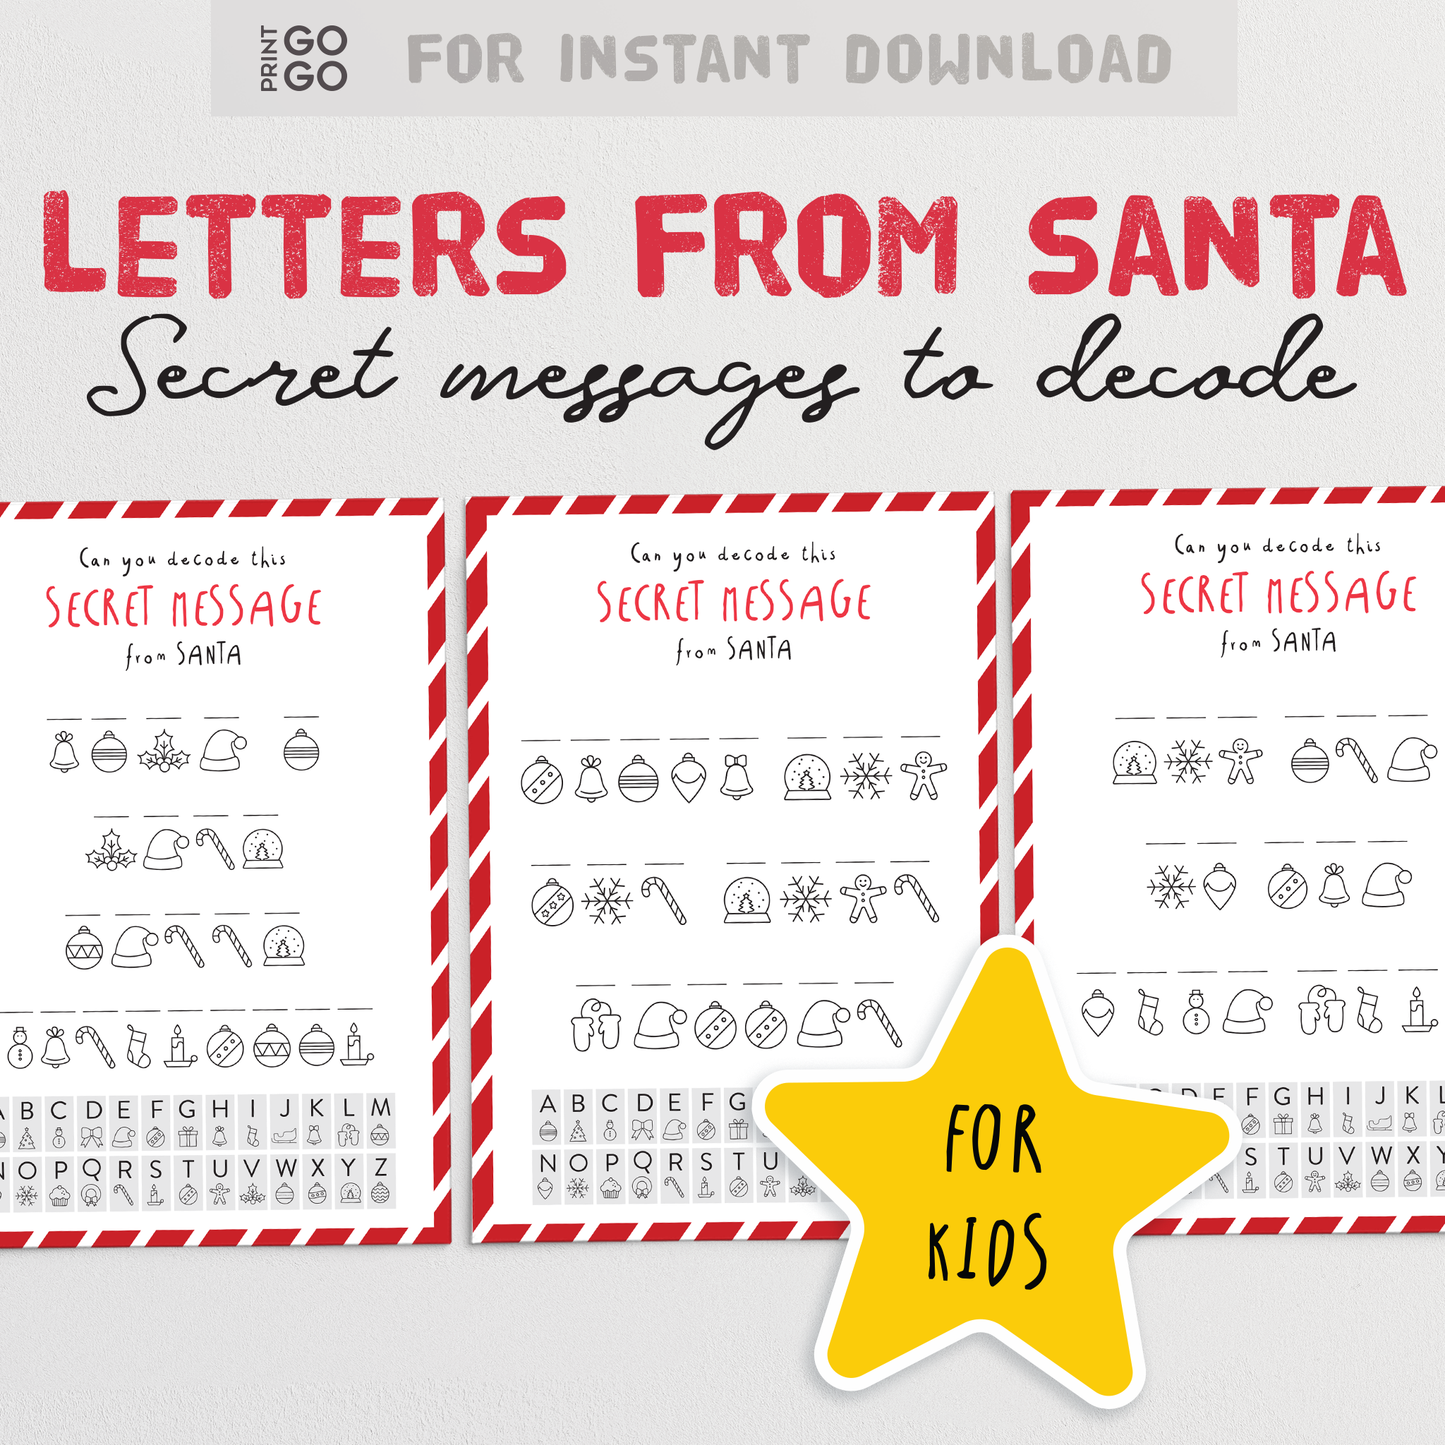 Coded Secret Messages from Santa